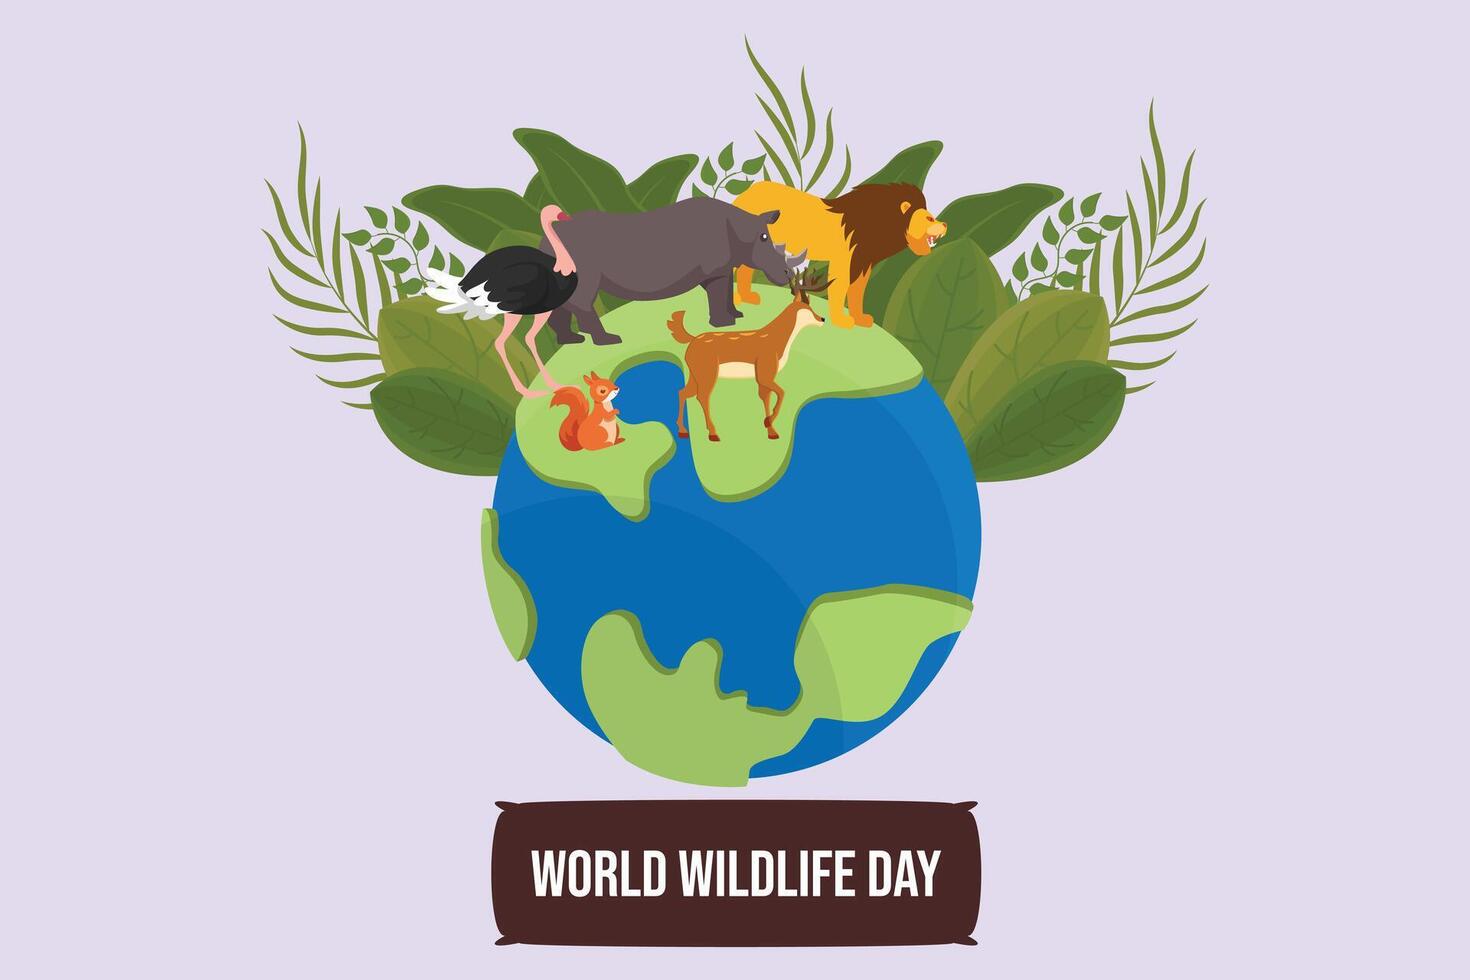 World wildlife day concept. Colored flat vector illustration isolated.